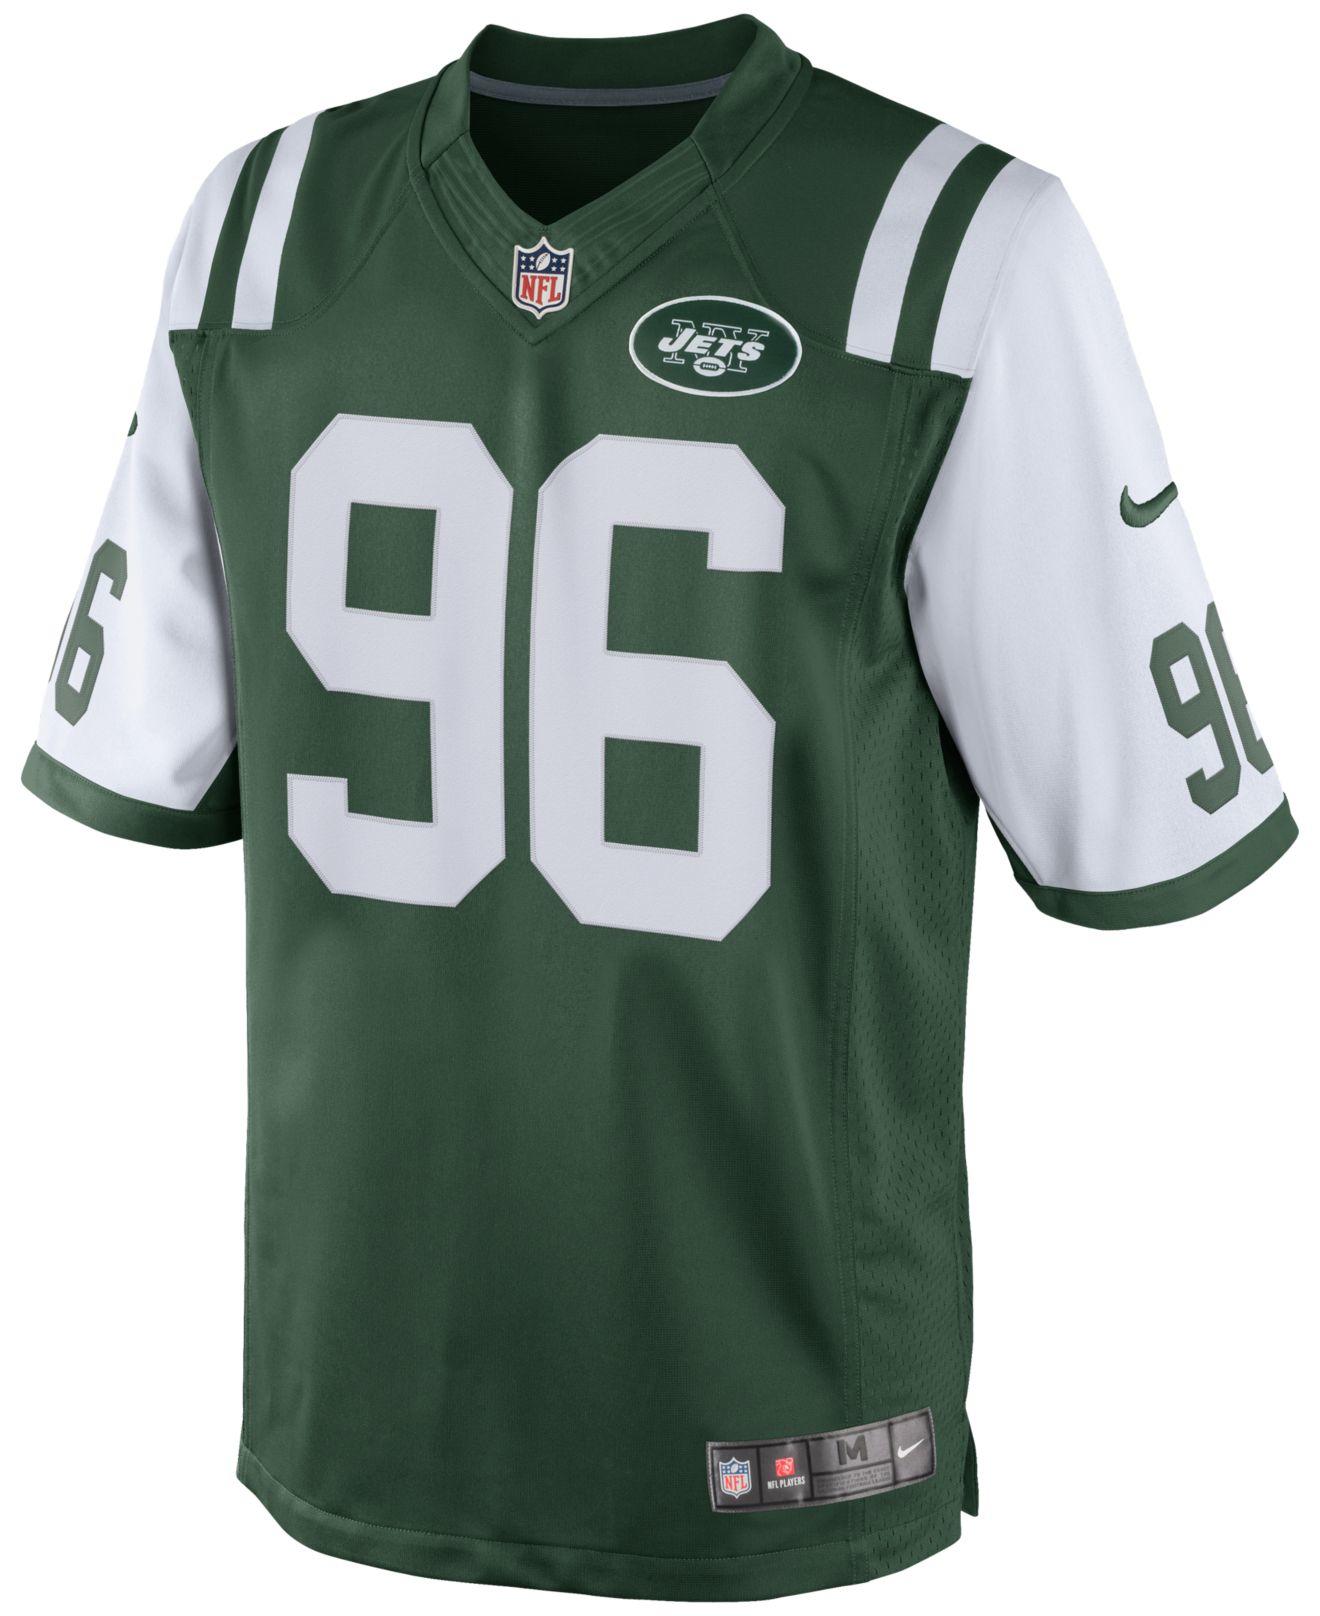 Lyst - Nike Men's Muhammad Wilkerson New York Jets Limited Jersey in ...